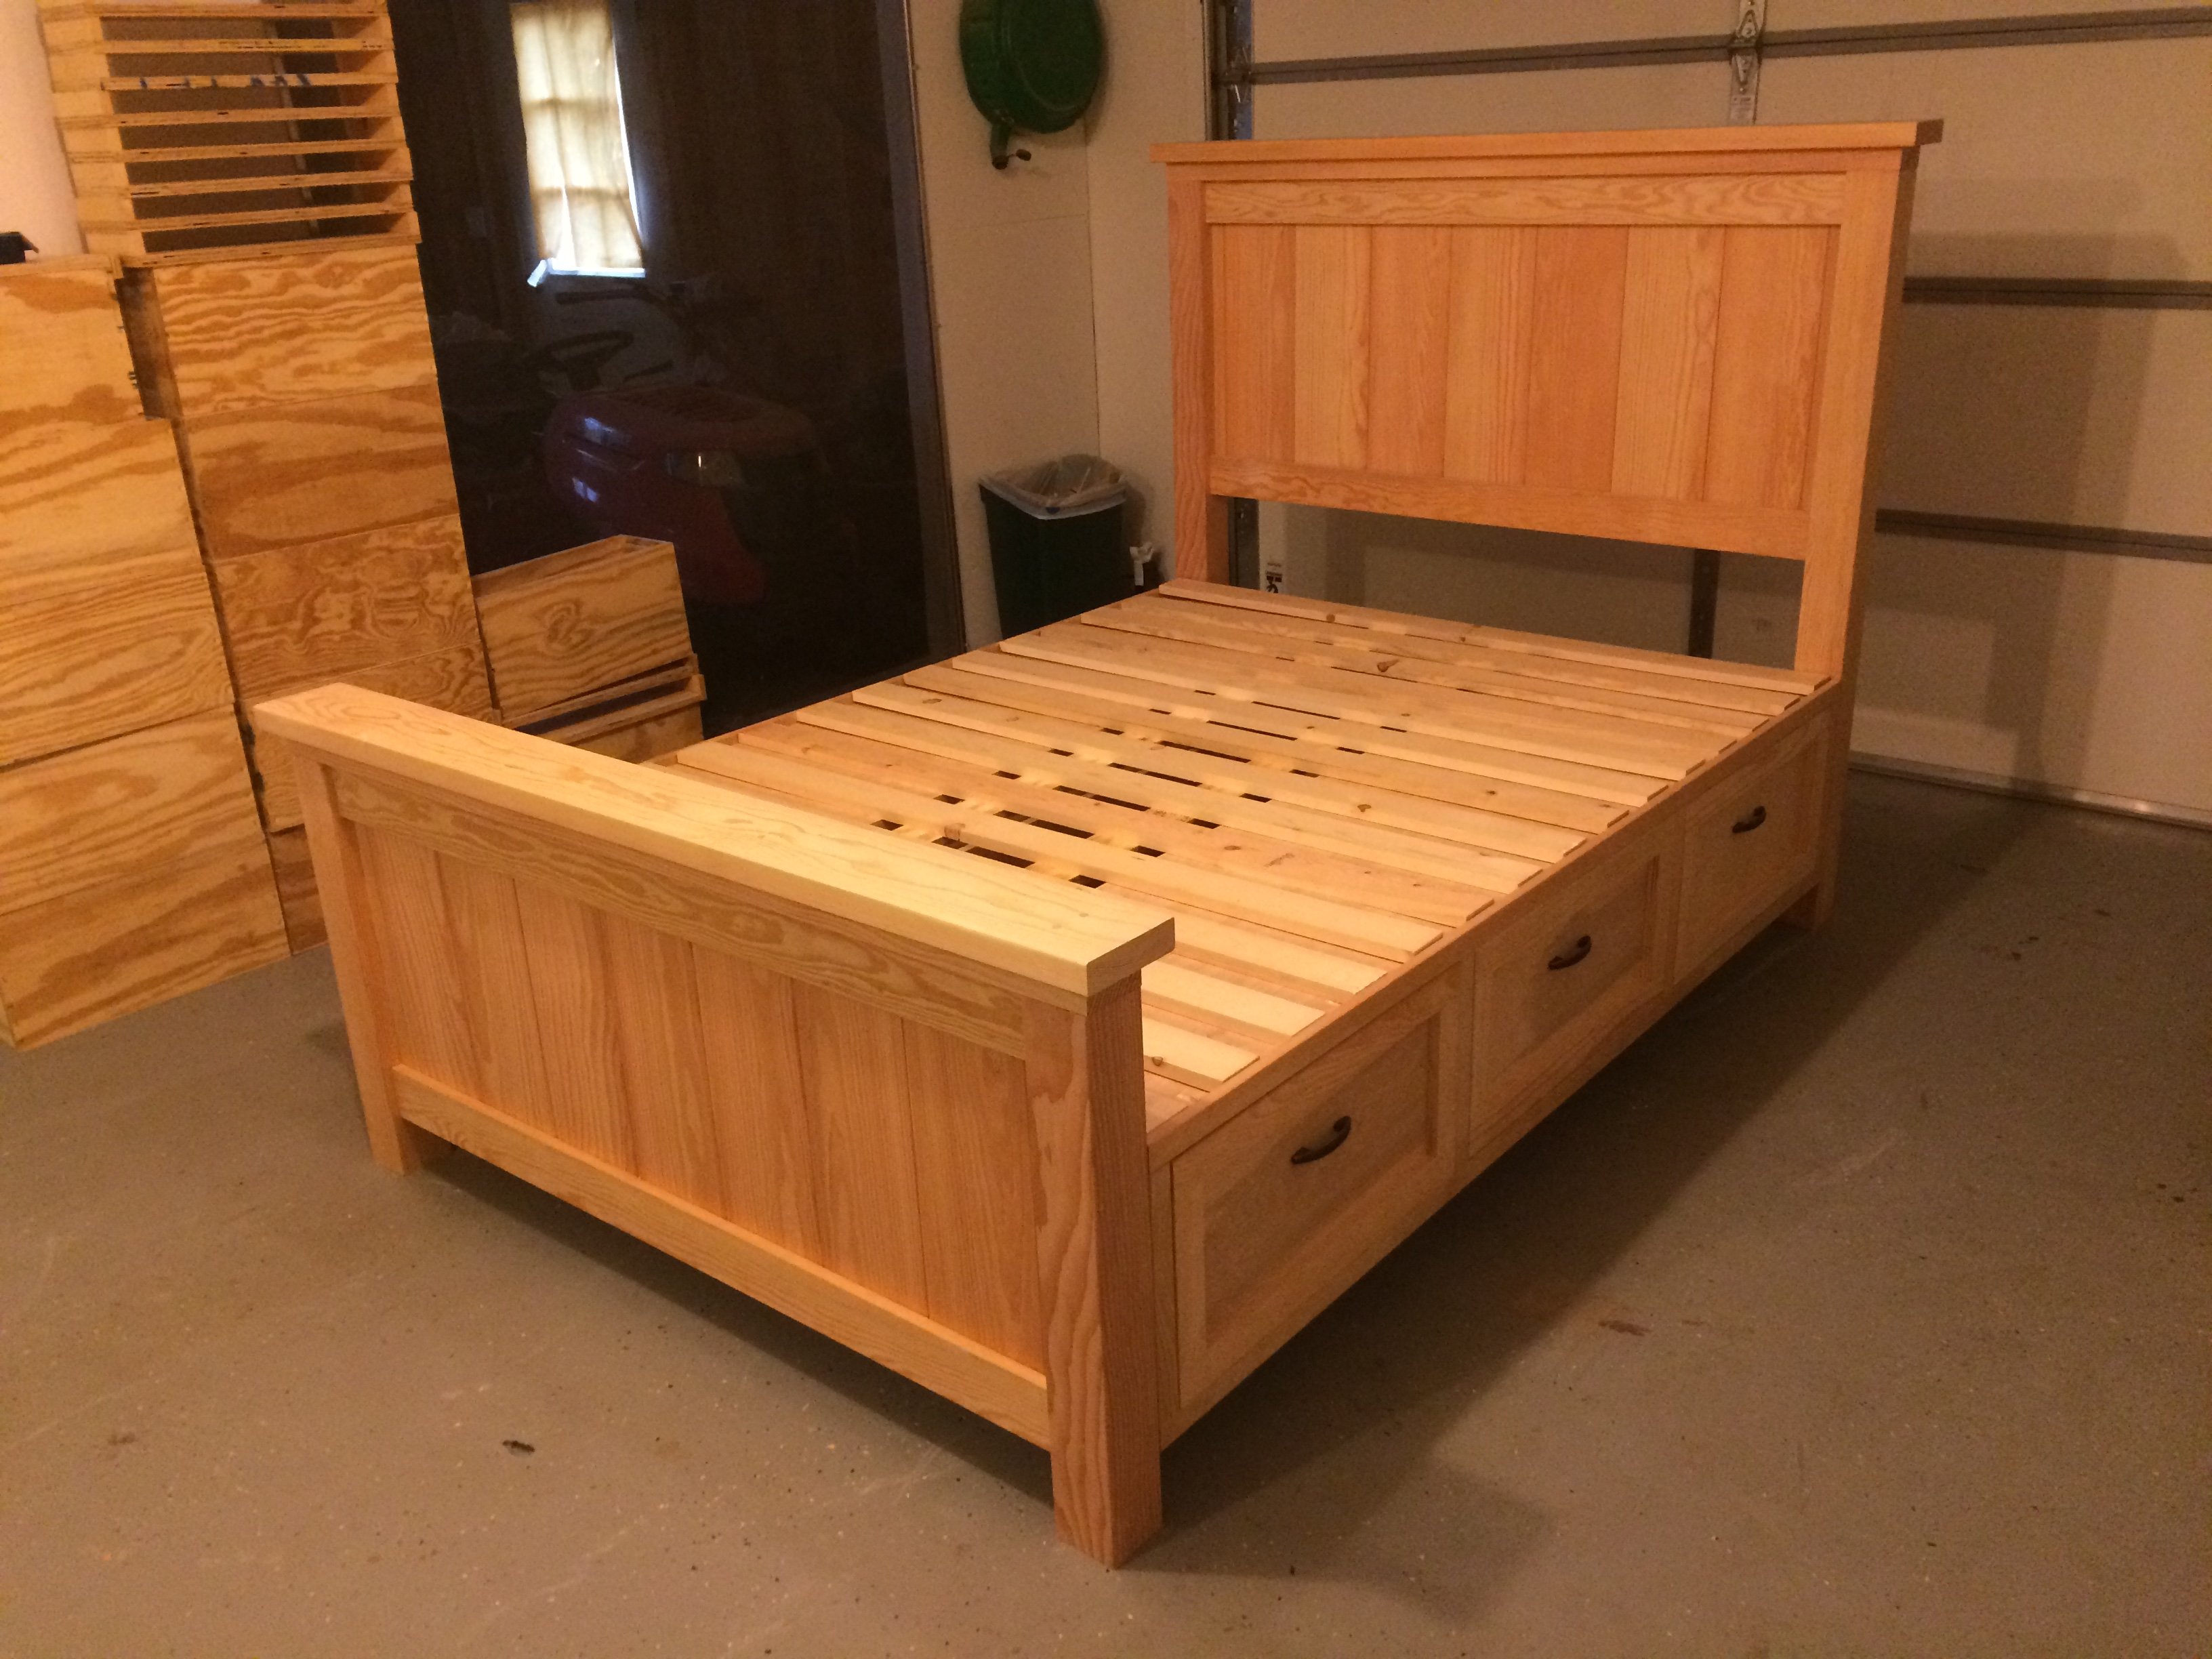 Farmhouse Storage Bed With Drawers, King Platform Bed With Storage Underneath Plans